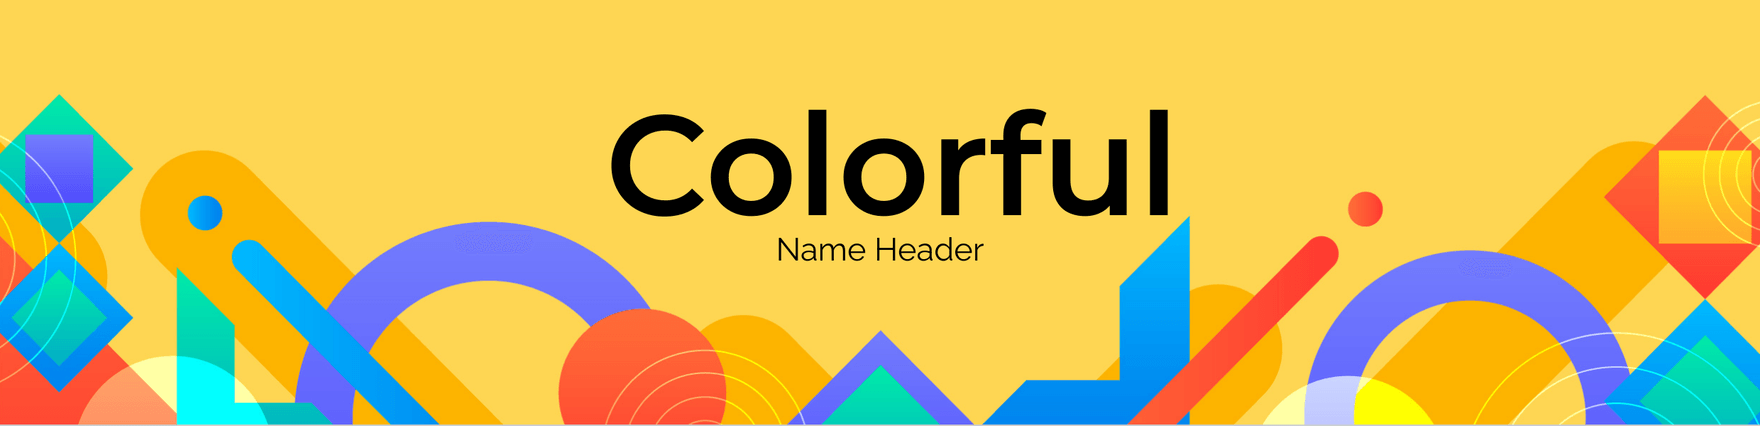 Colorful Name Header Template